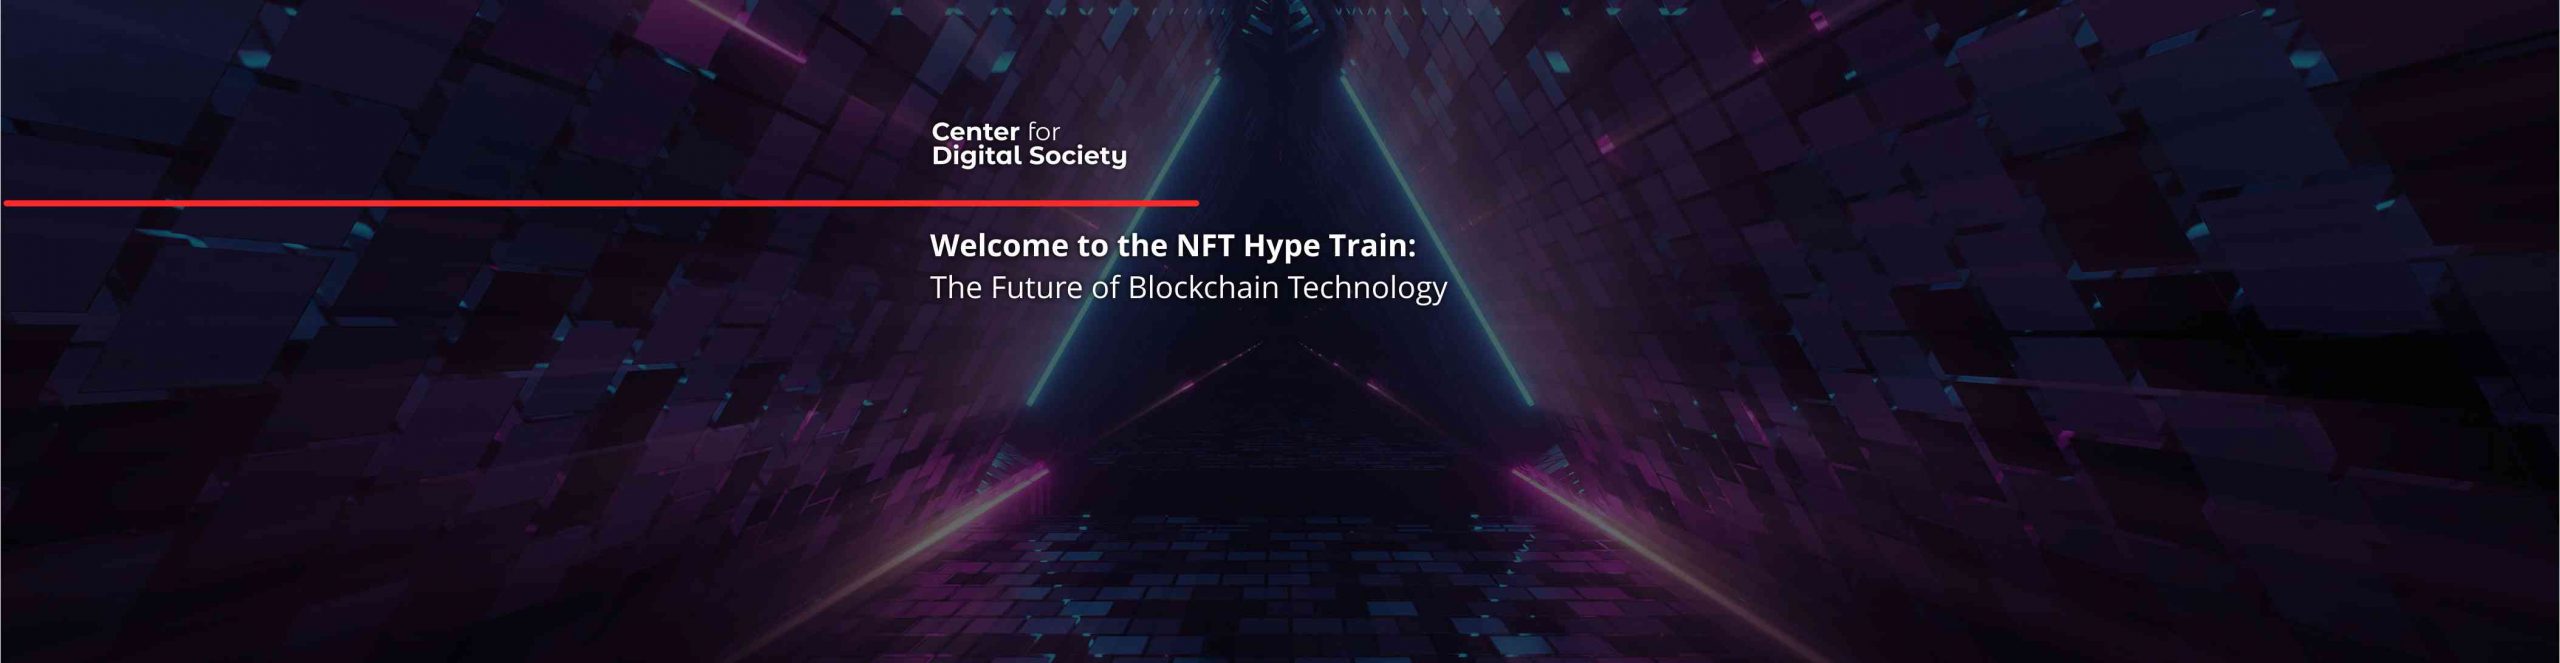 Welcome to the NFT Hype Train: The Future of Blockchain Technology